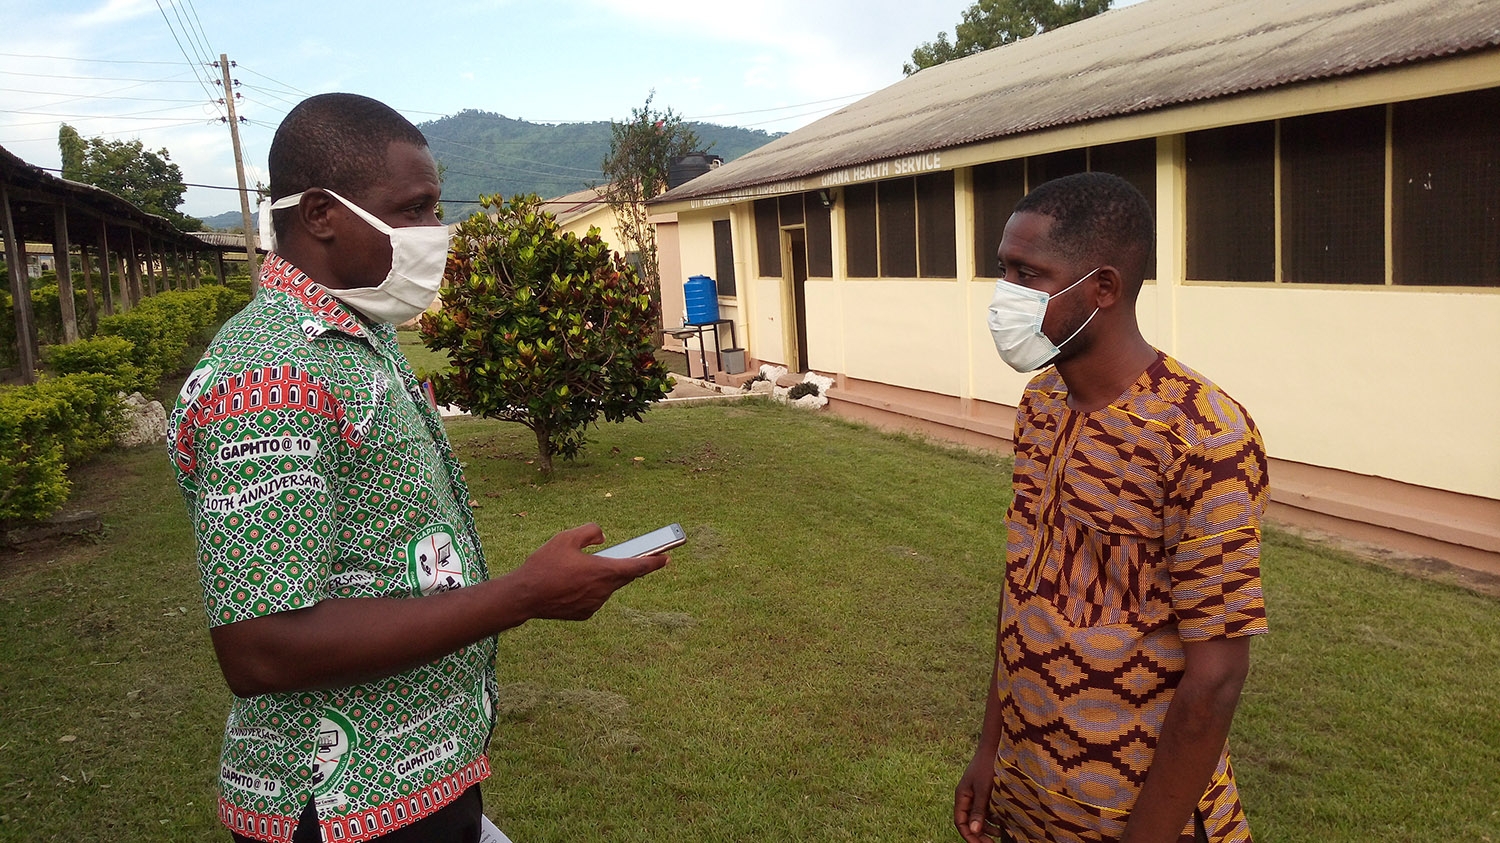 Two men wearing surgical masks stand opposite each other in conversation.